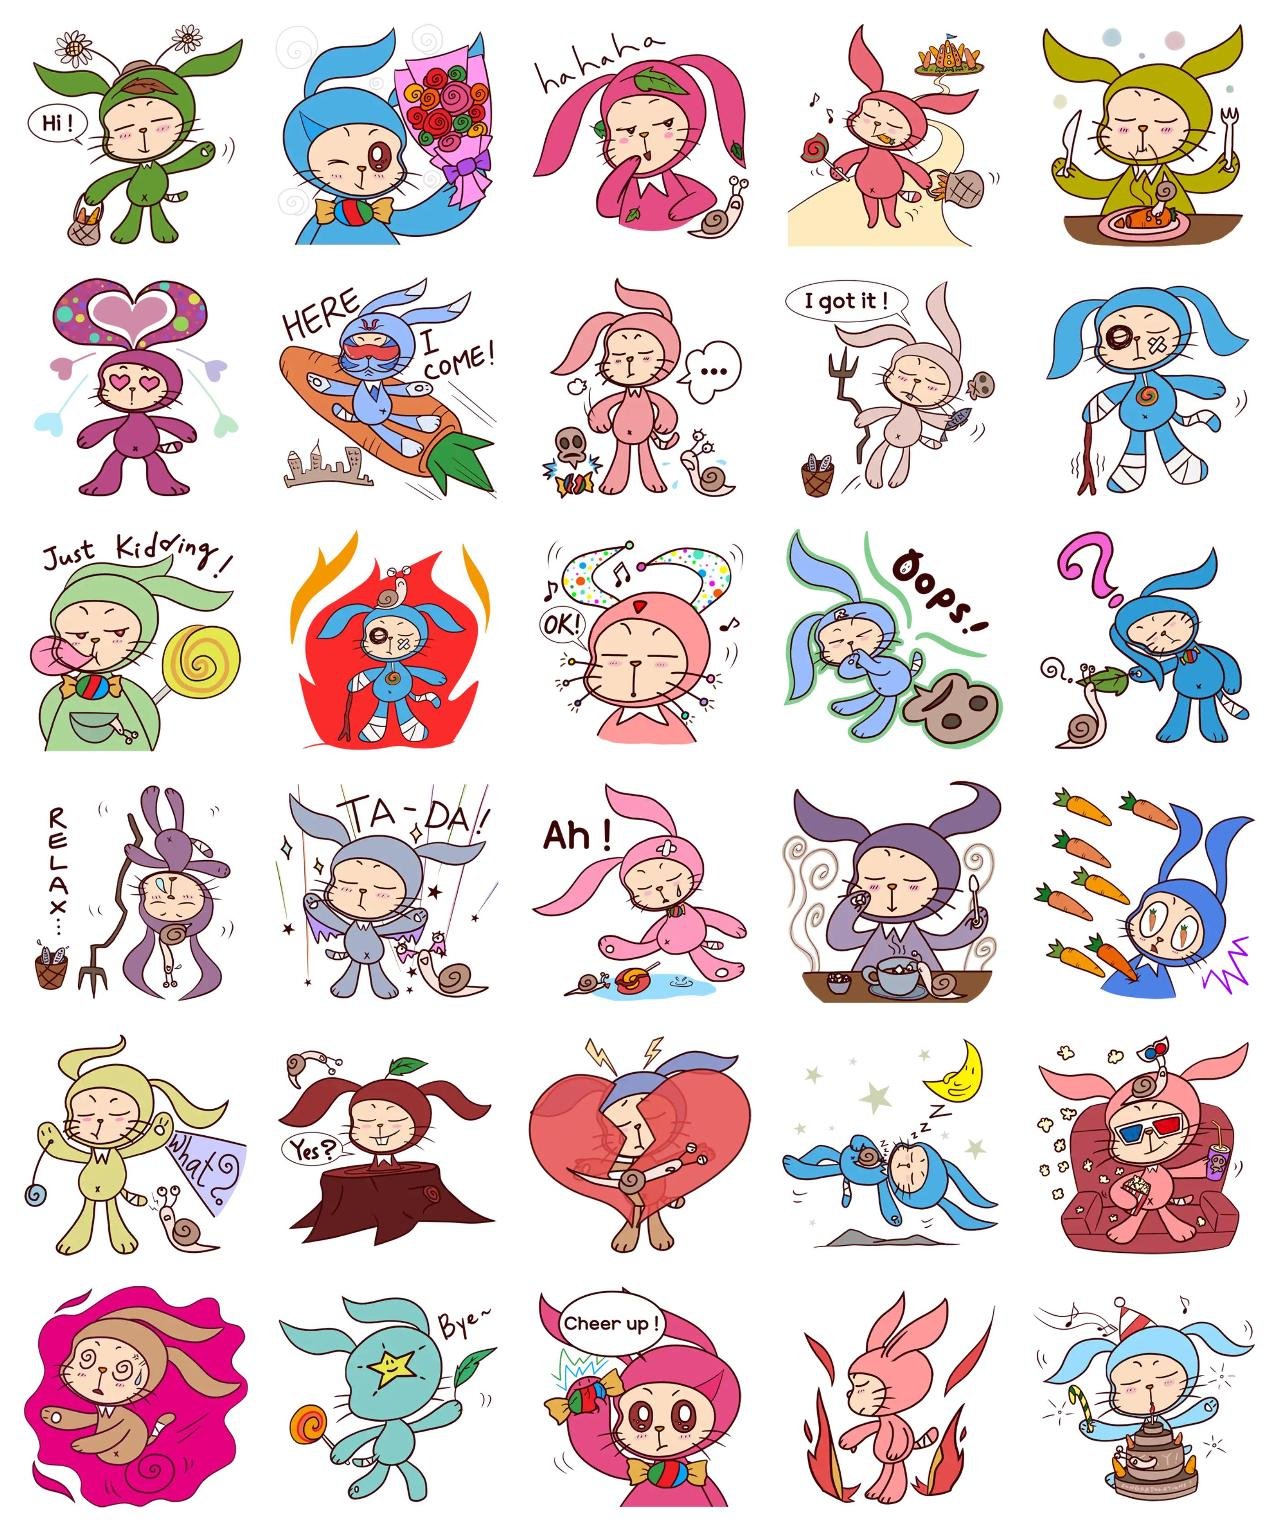 My friend Ppyorotong Animation/Cartoon,Animals sticker pack for Whatsapp, Telegram, Signal, and others chatting and message apps